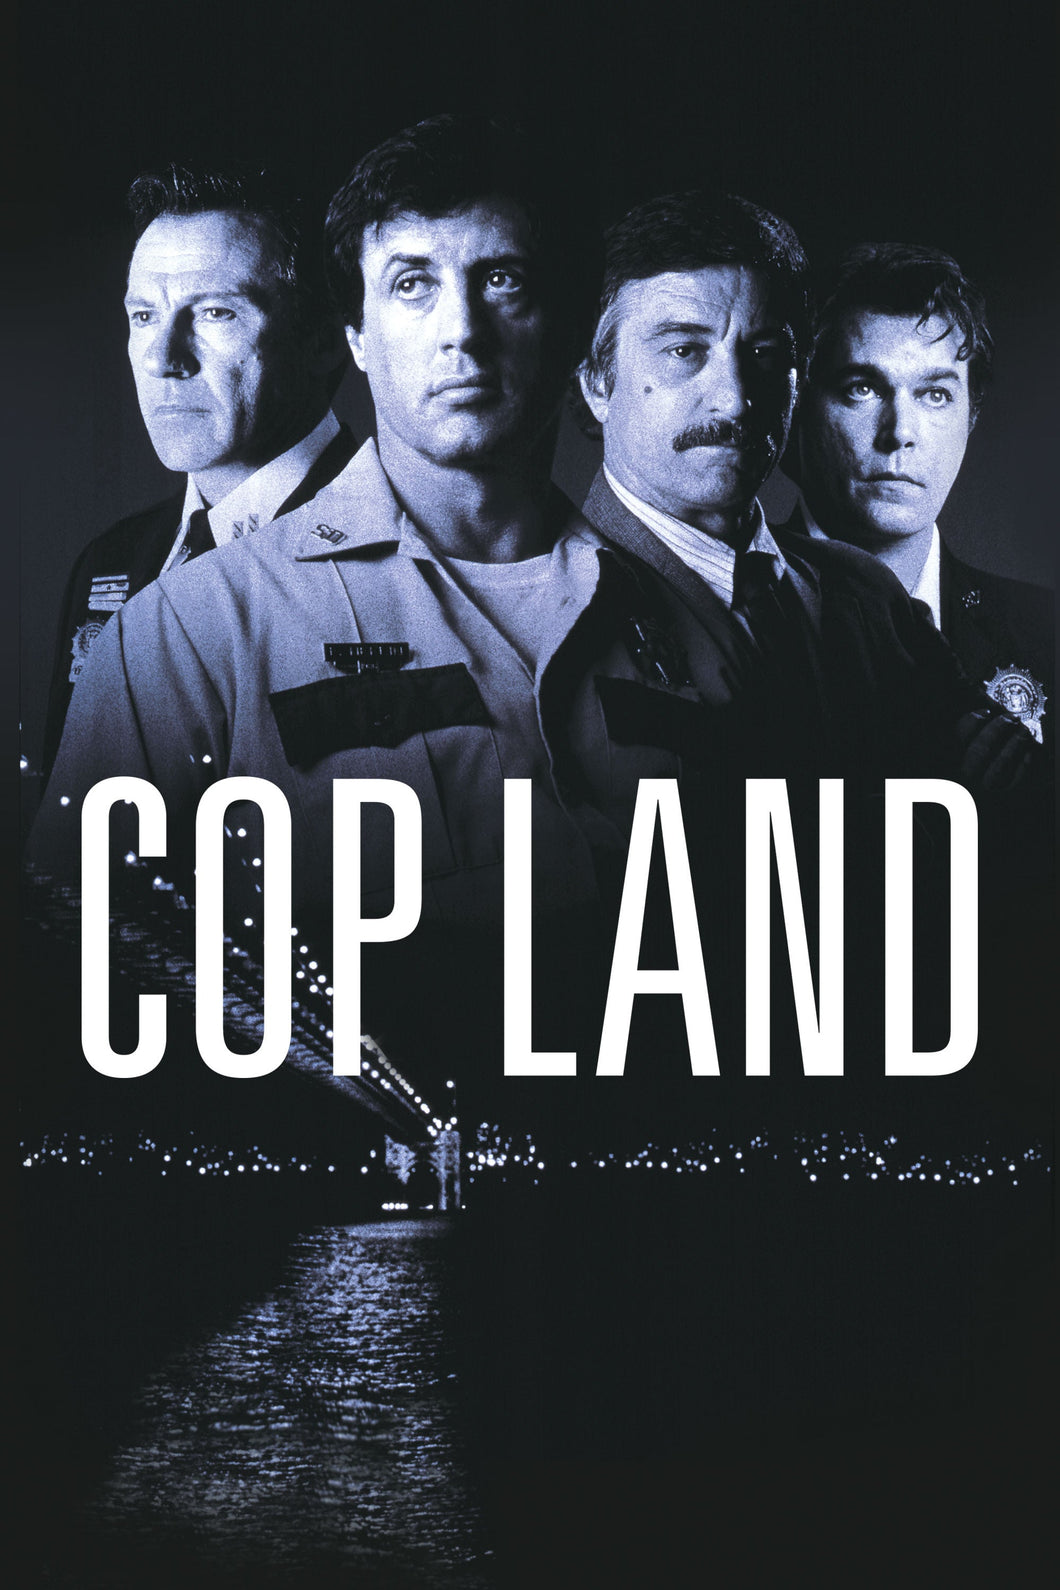 Cop Land (1997) Movie Poster High Quality Glossy Paper A1 A2 A3 A4 A3 Framed or Unframed!!!